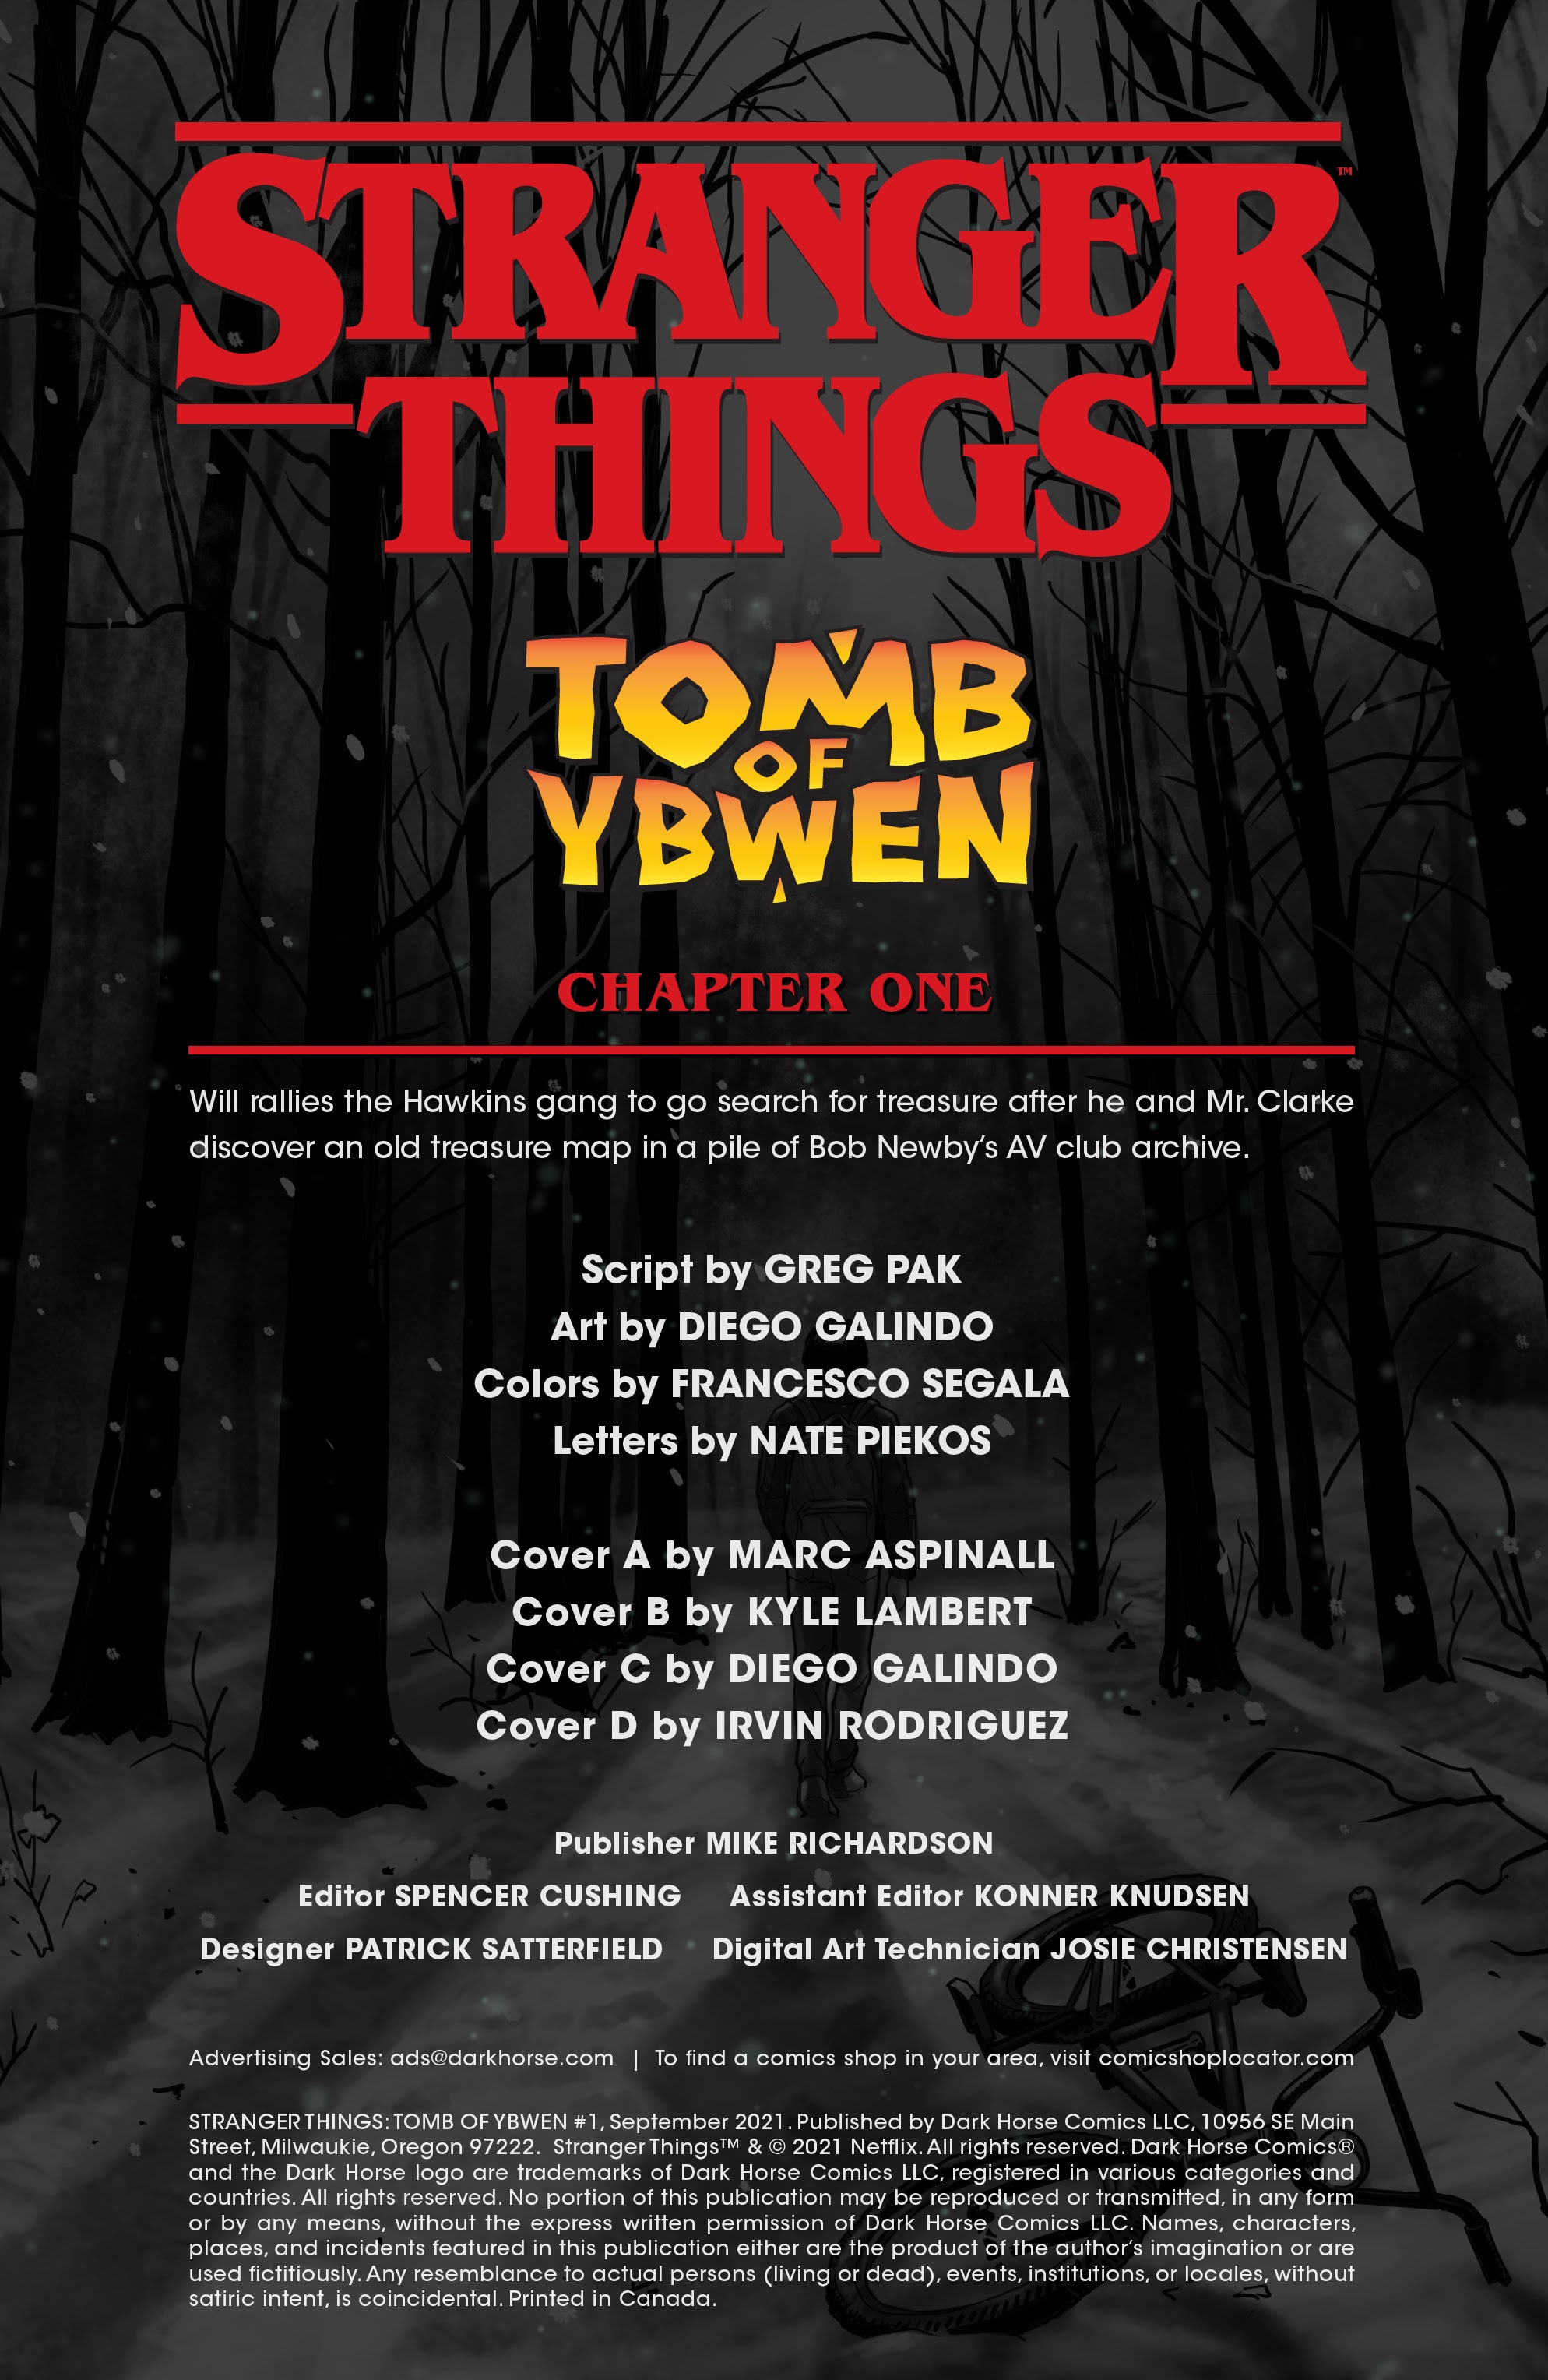 Read online Stranger Things: The Tomb of Ybwen comic -  Issue #1 - 2